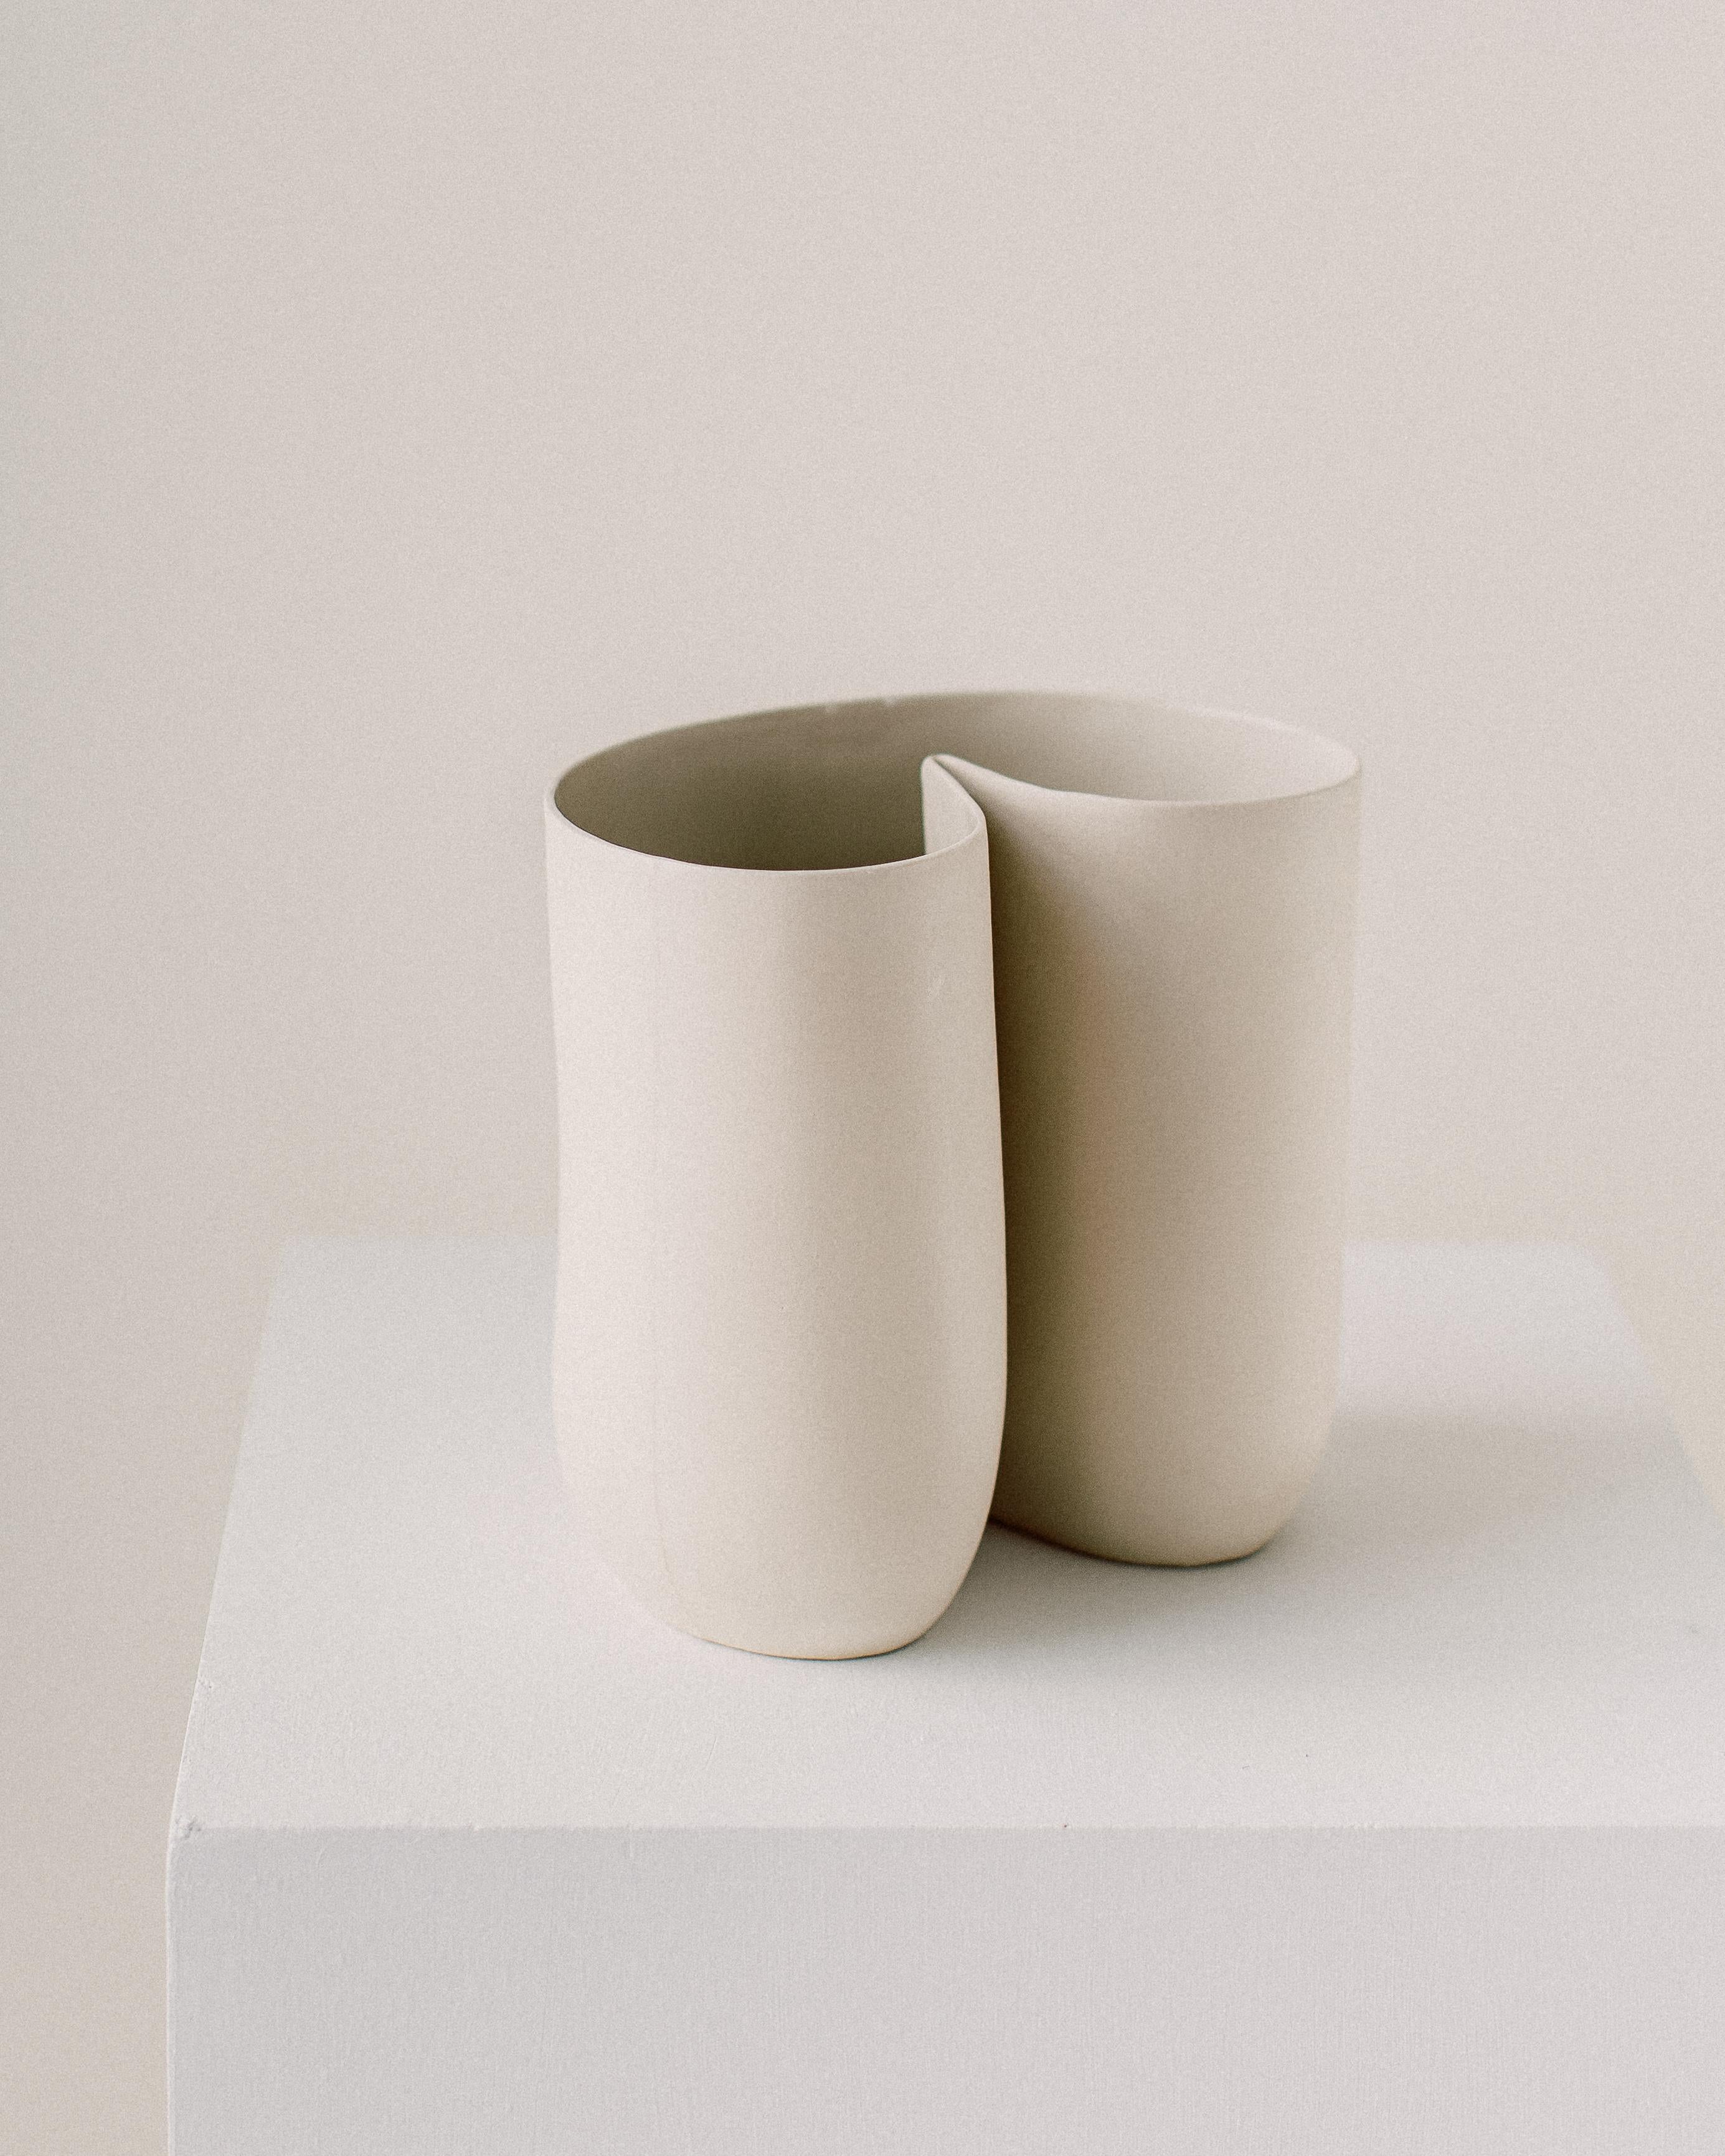 Unique esse vessel by Dust and Form
Dimensions: W 14 x D 20.3 x 19 H cm
Materials: Porcelain
Origin Form Collection in three finishes: Hand-sanded (our Classic, smooth, bare finish) Ivory (satin white glaze) Charcoal (matte black glaze).
The esse